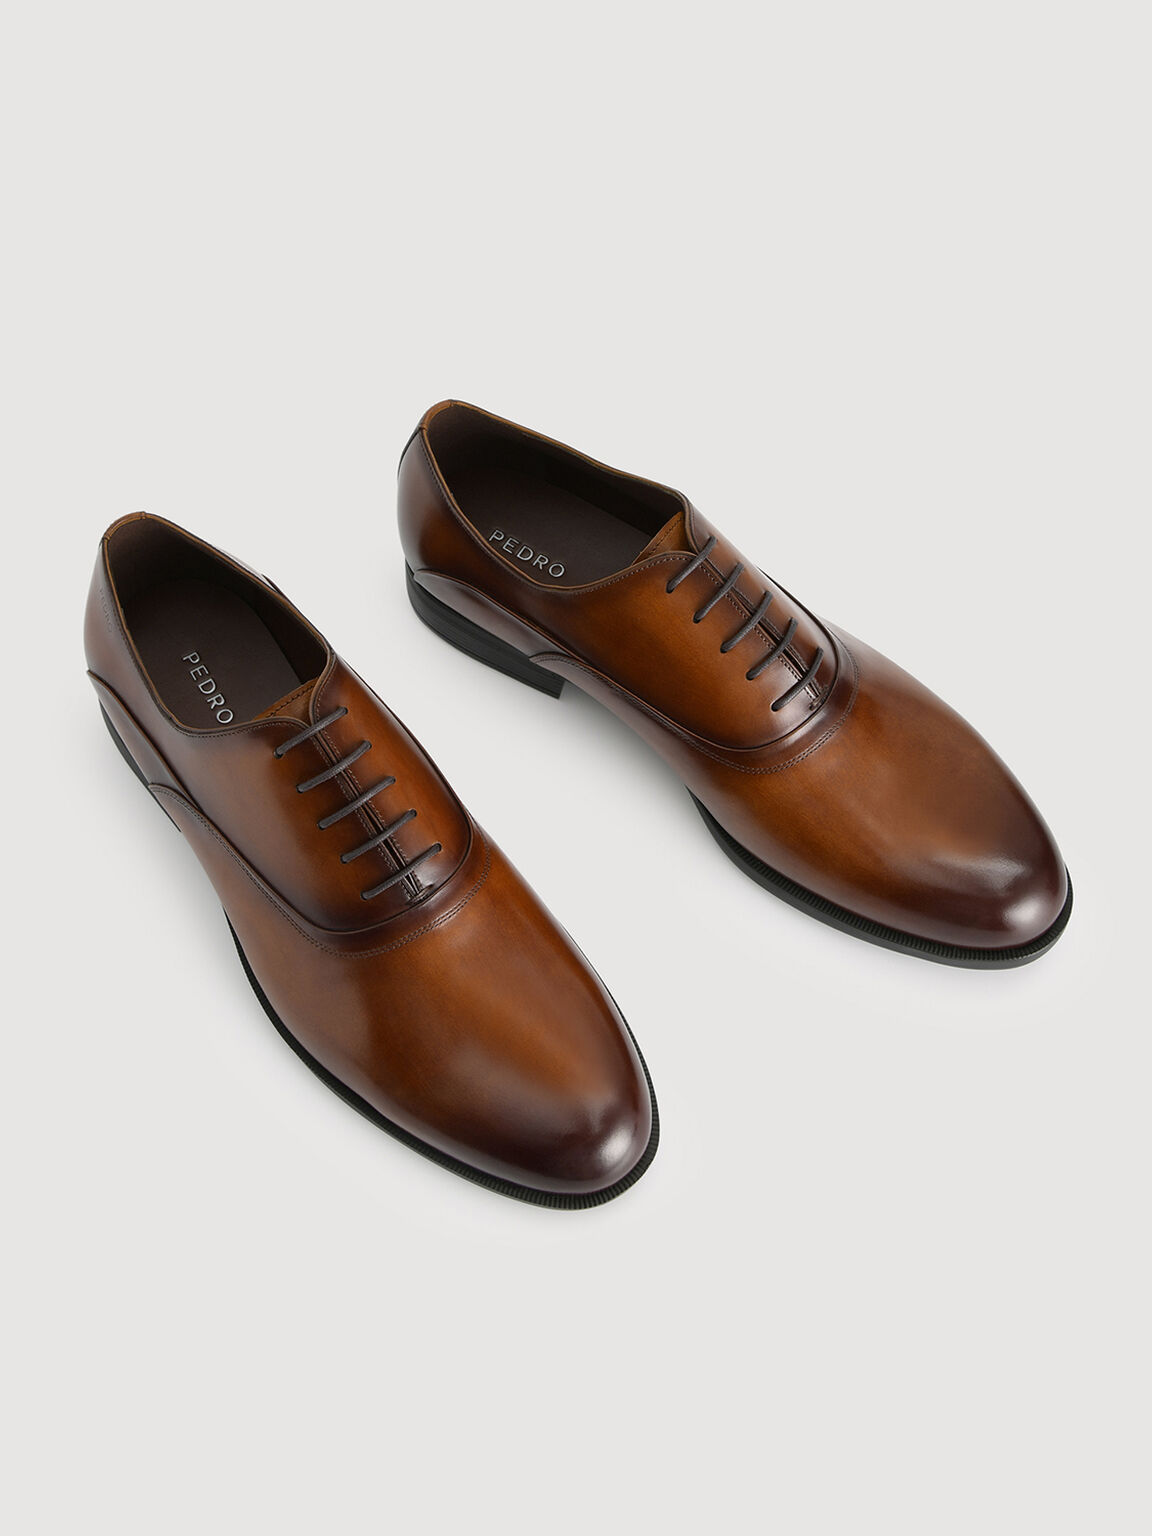 Lightweight Leather Oxford Shoes, Cognac